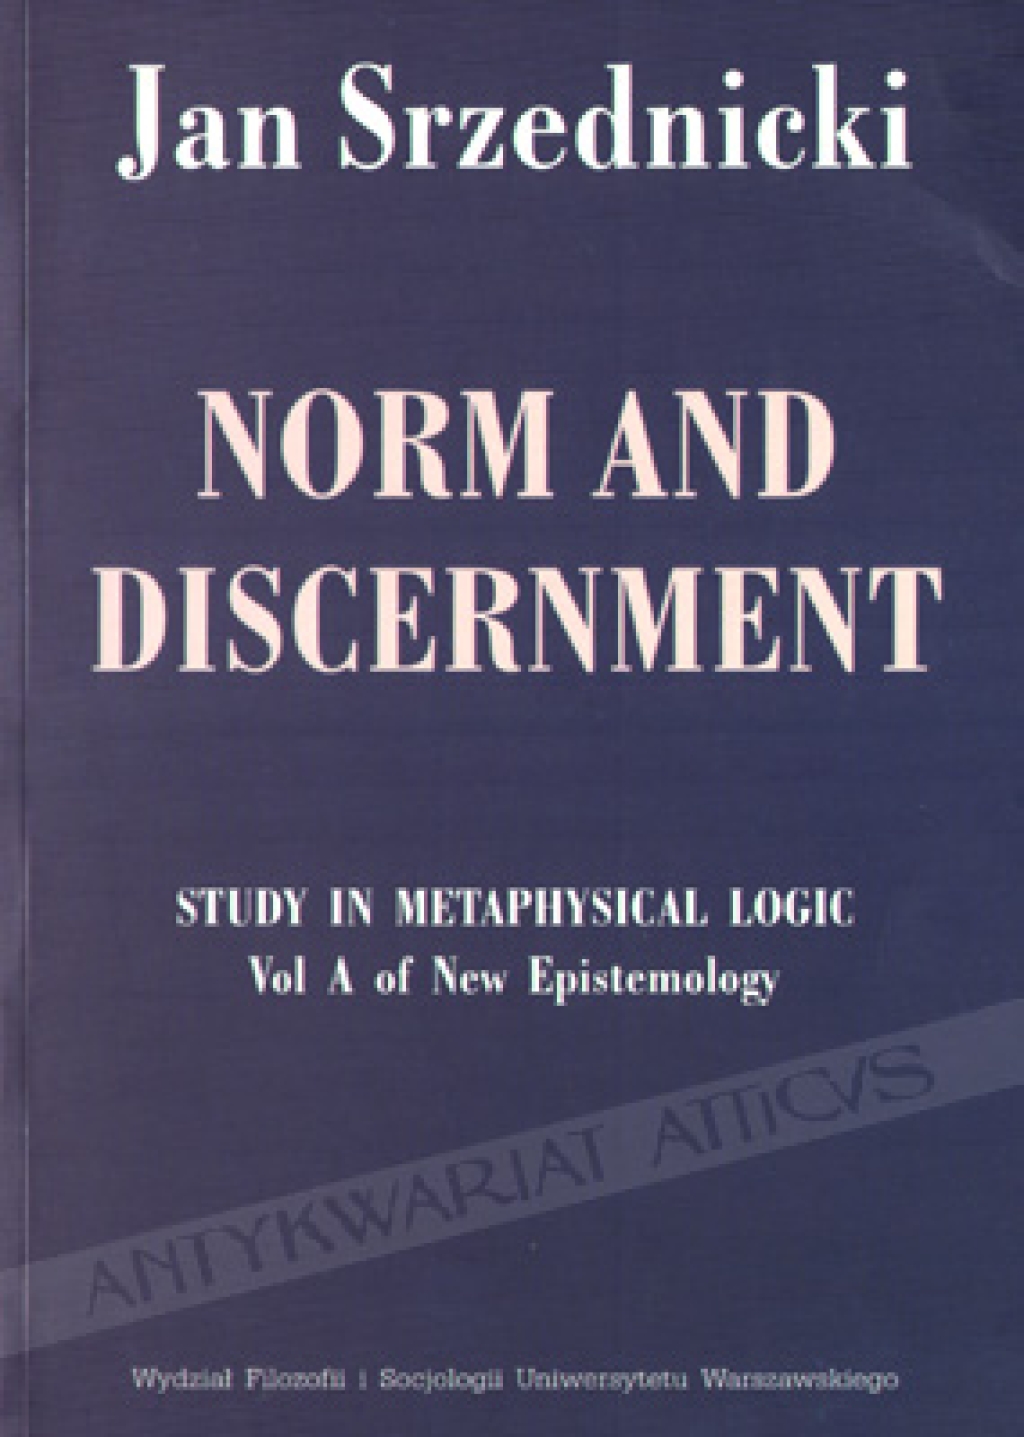 Norm and Discernment. Study in Metaphysical Logic. Vol A of New Epistemology